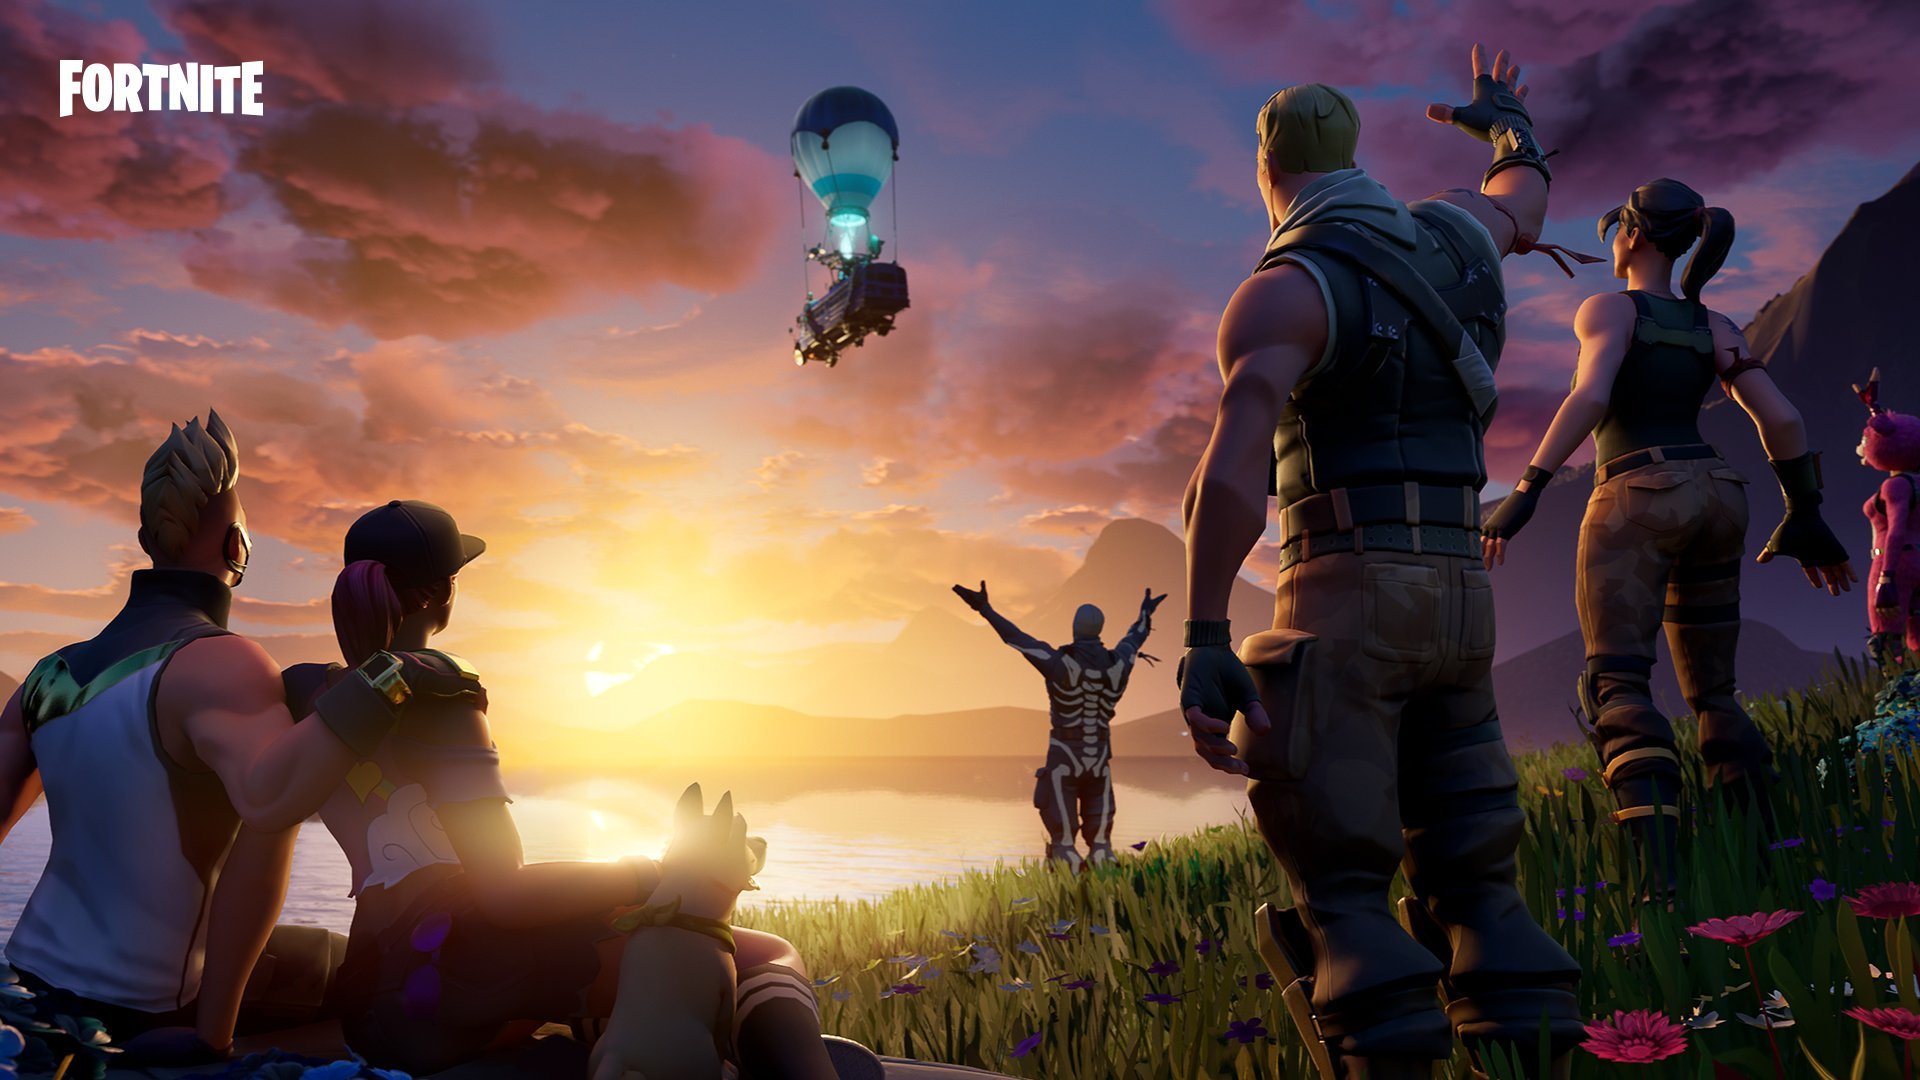 Fortnite live event: watch ‘The End’ of season X here | VGC